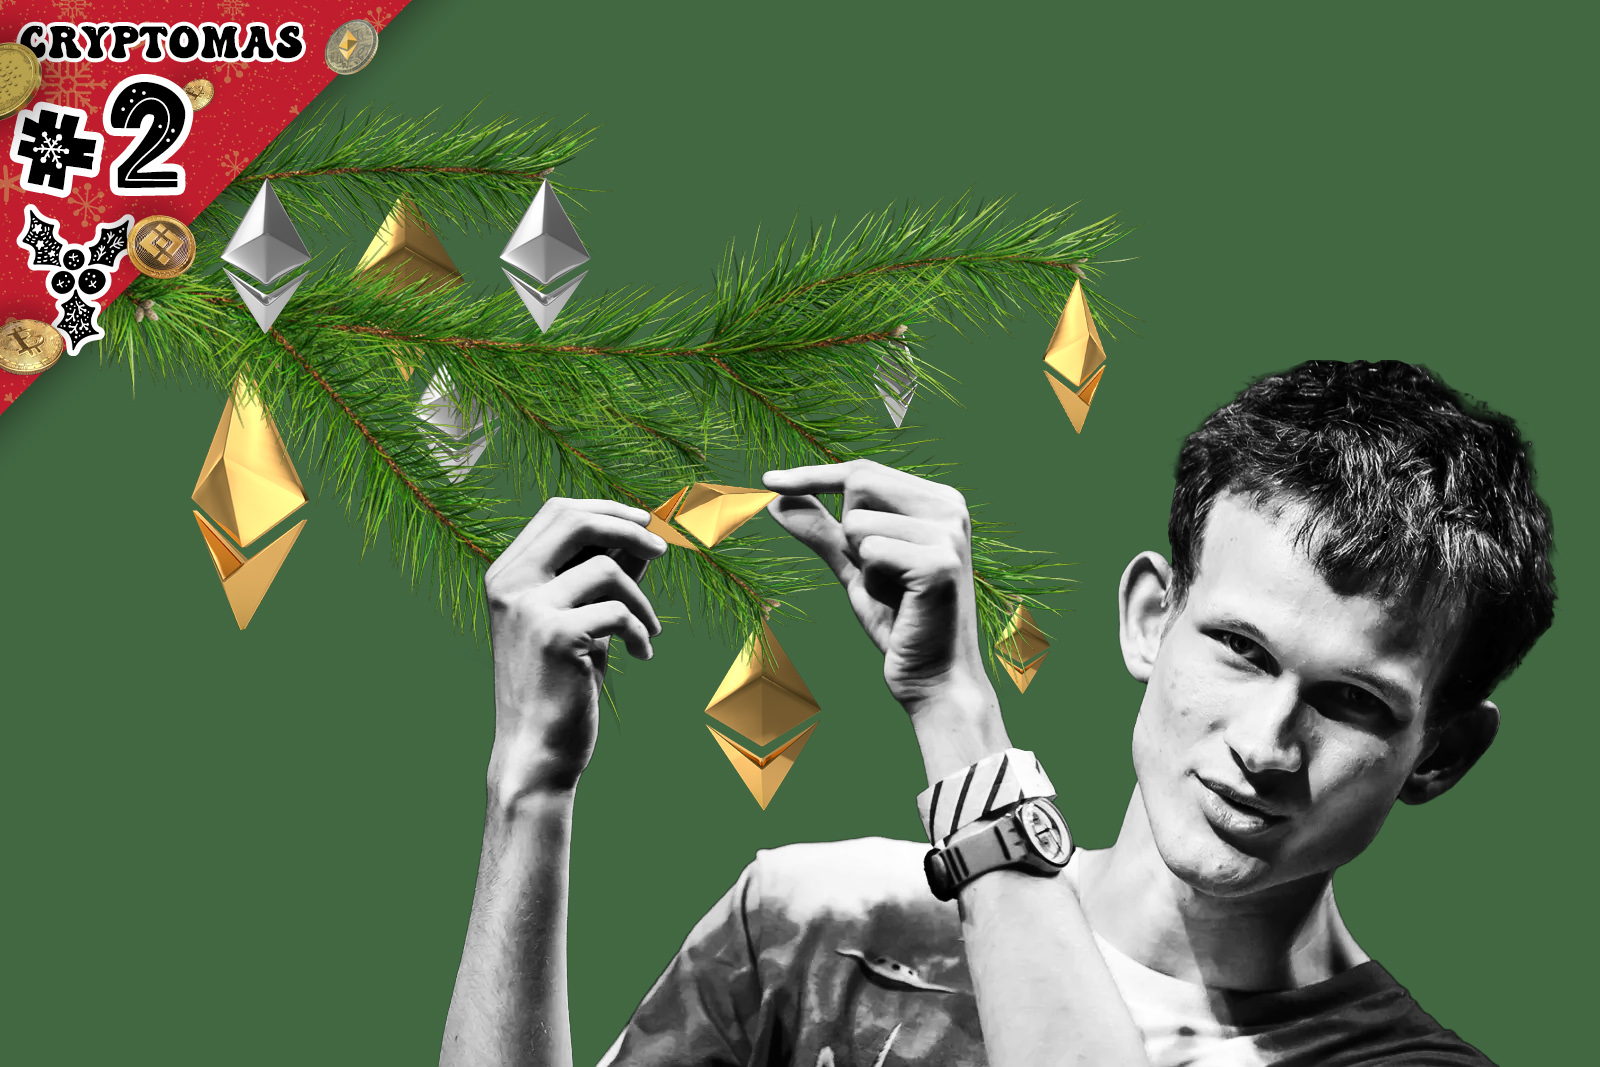 A Christmassy top corner denotes "Cryptomas #2". The central image depicts Vitalik Buterin decorating a tree with Ether